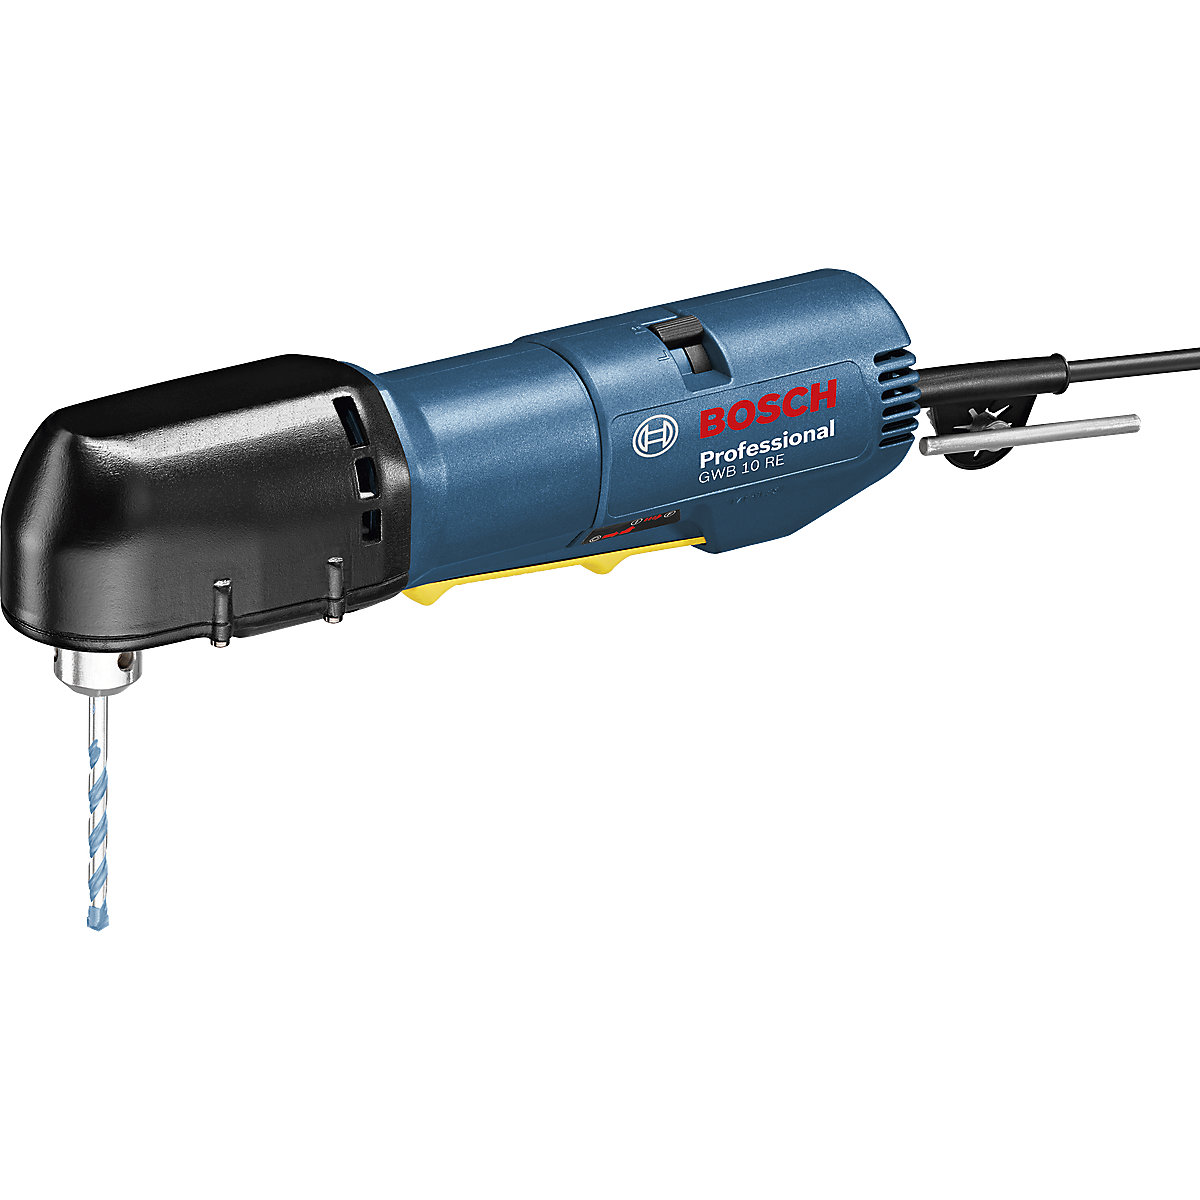 Perceuse angulaire GWB 10 RE Professional – Bosch